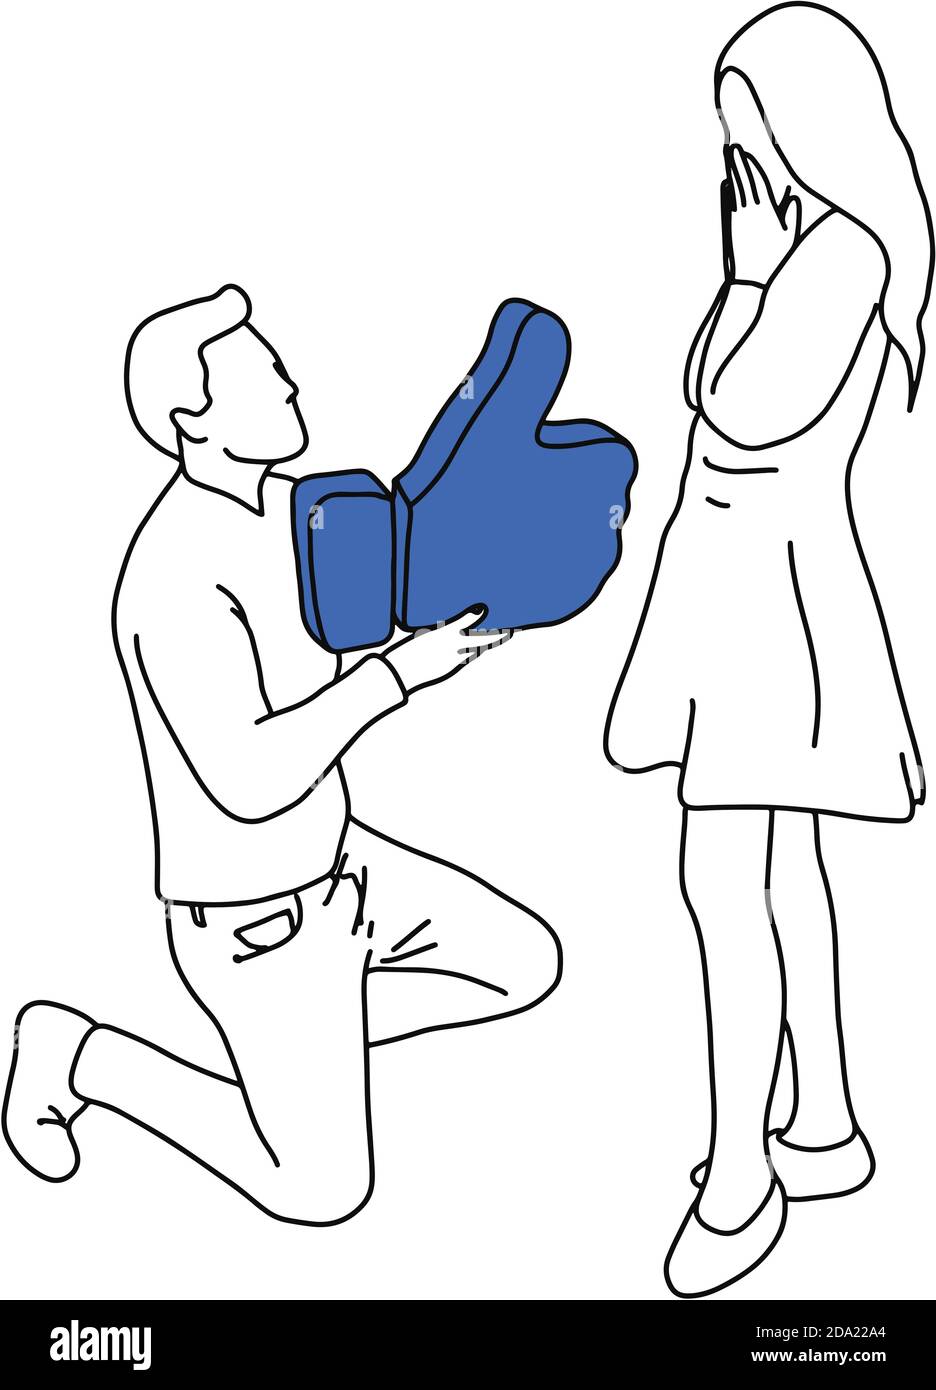 Continuous One Line Man Makes A Marriage Proposal To A Woman Royalty Free  SVG, Cliparts, Vectors, and Stock Illustration. Image 122046782.